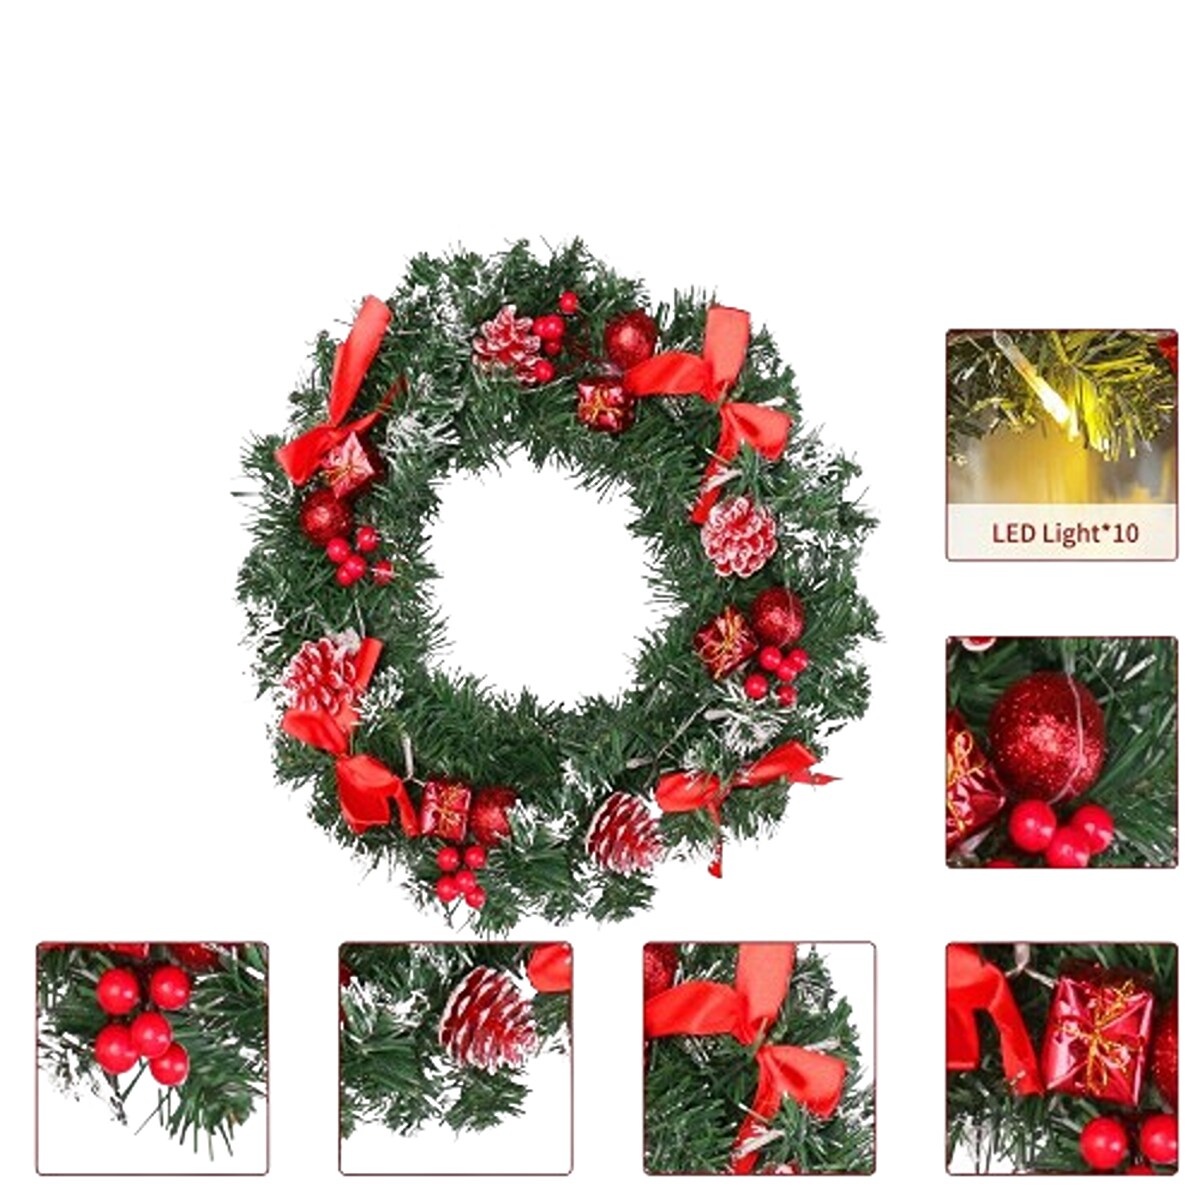 16 Inches Artificial Christmas LED Wreath Garland Decor